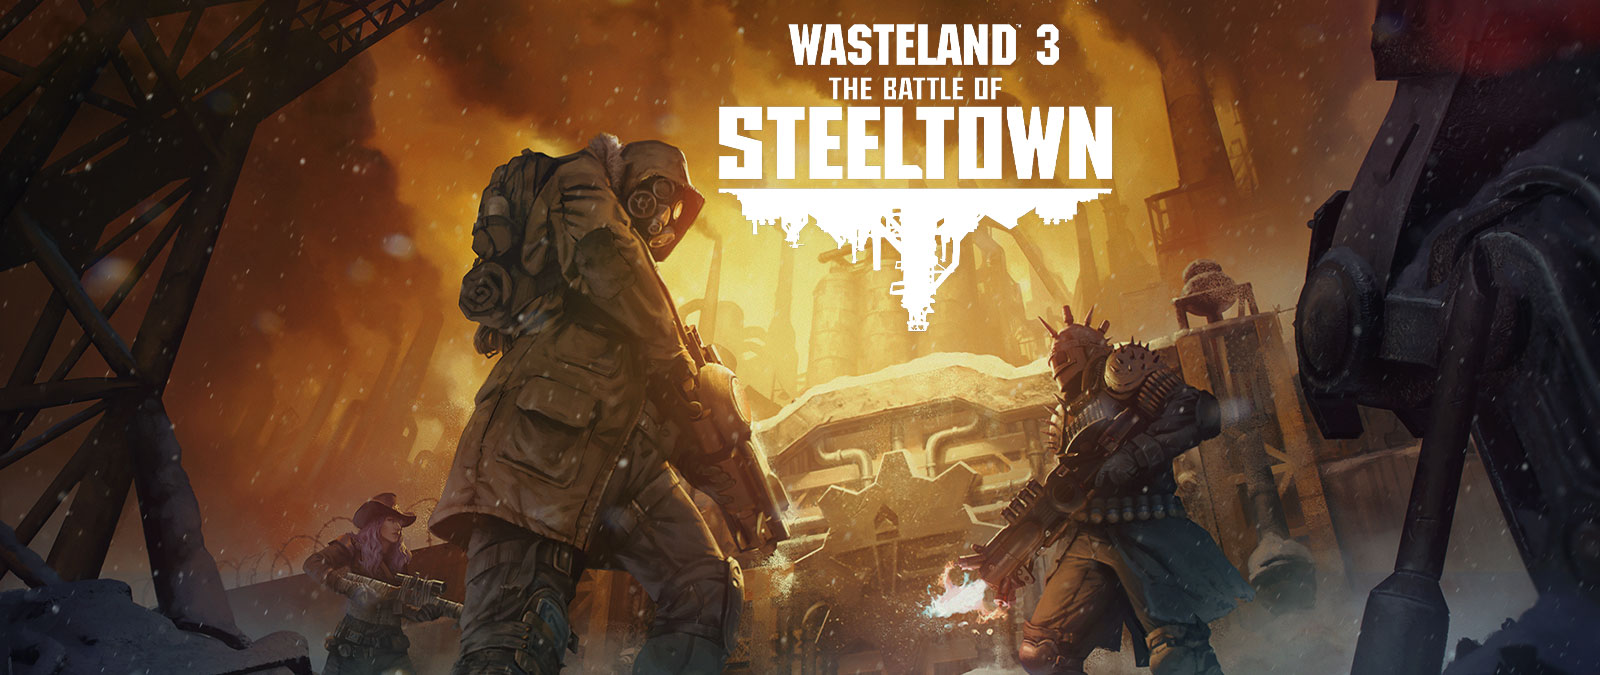 Wasteland 3: The Battle of Steeltown. Three characters with weapons and armour in front of a door with an industrial background